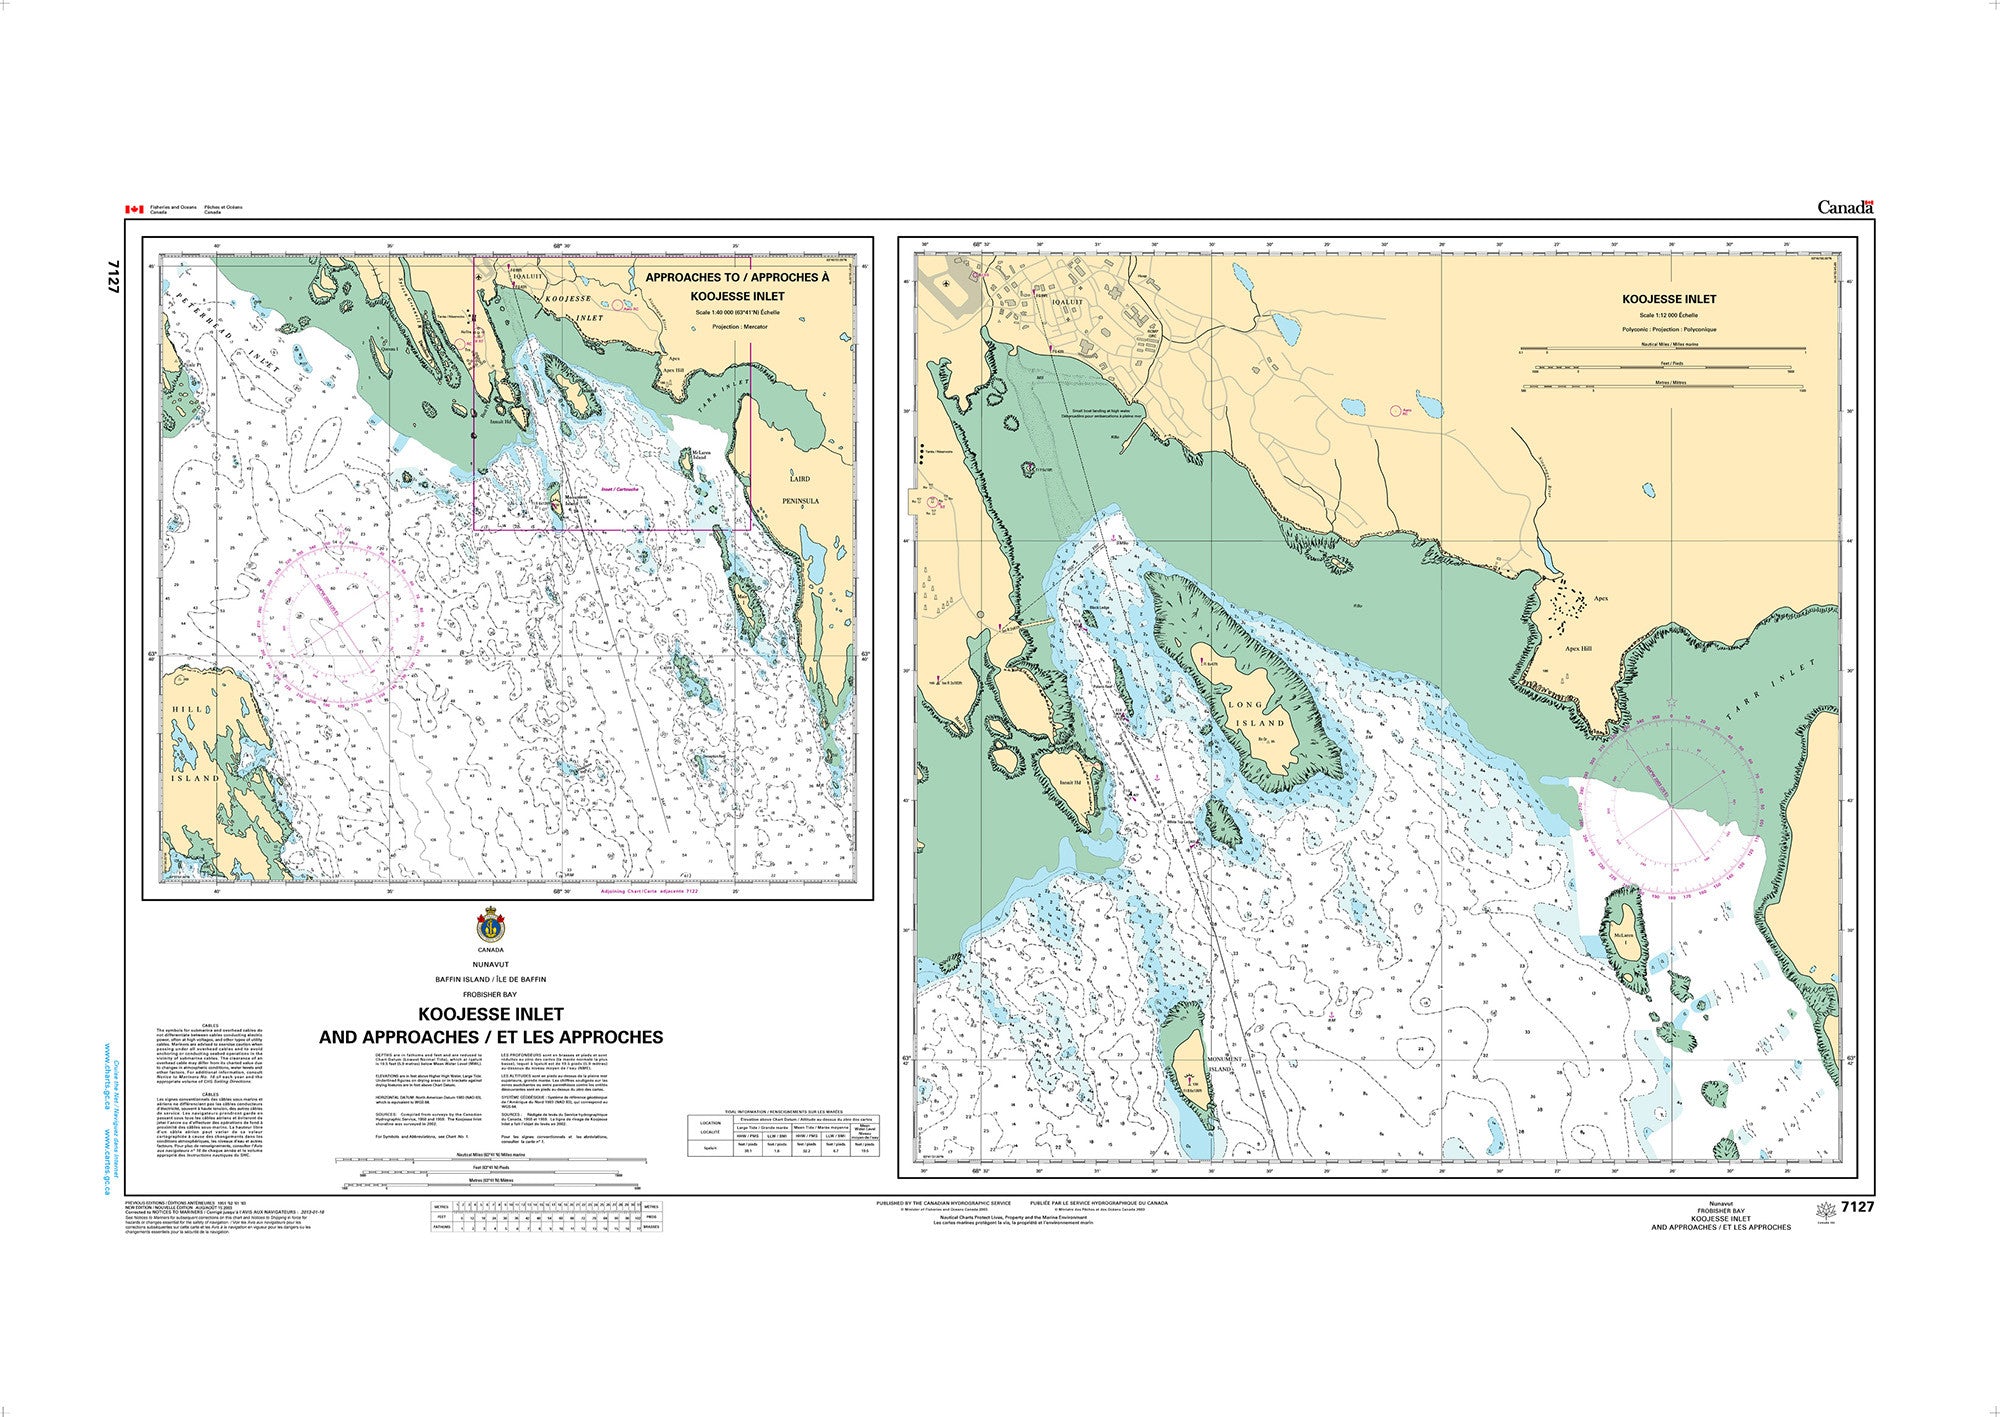 Canadian Hydrographic Service Nautical Chart CHS7127: Koojesse Inlet and Approaches/et les Approches